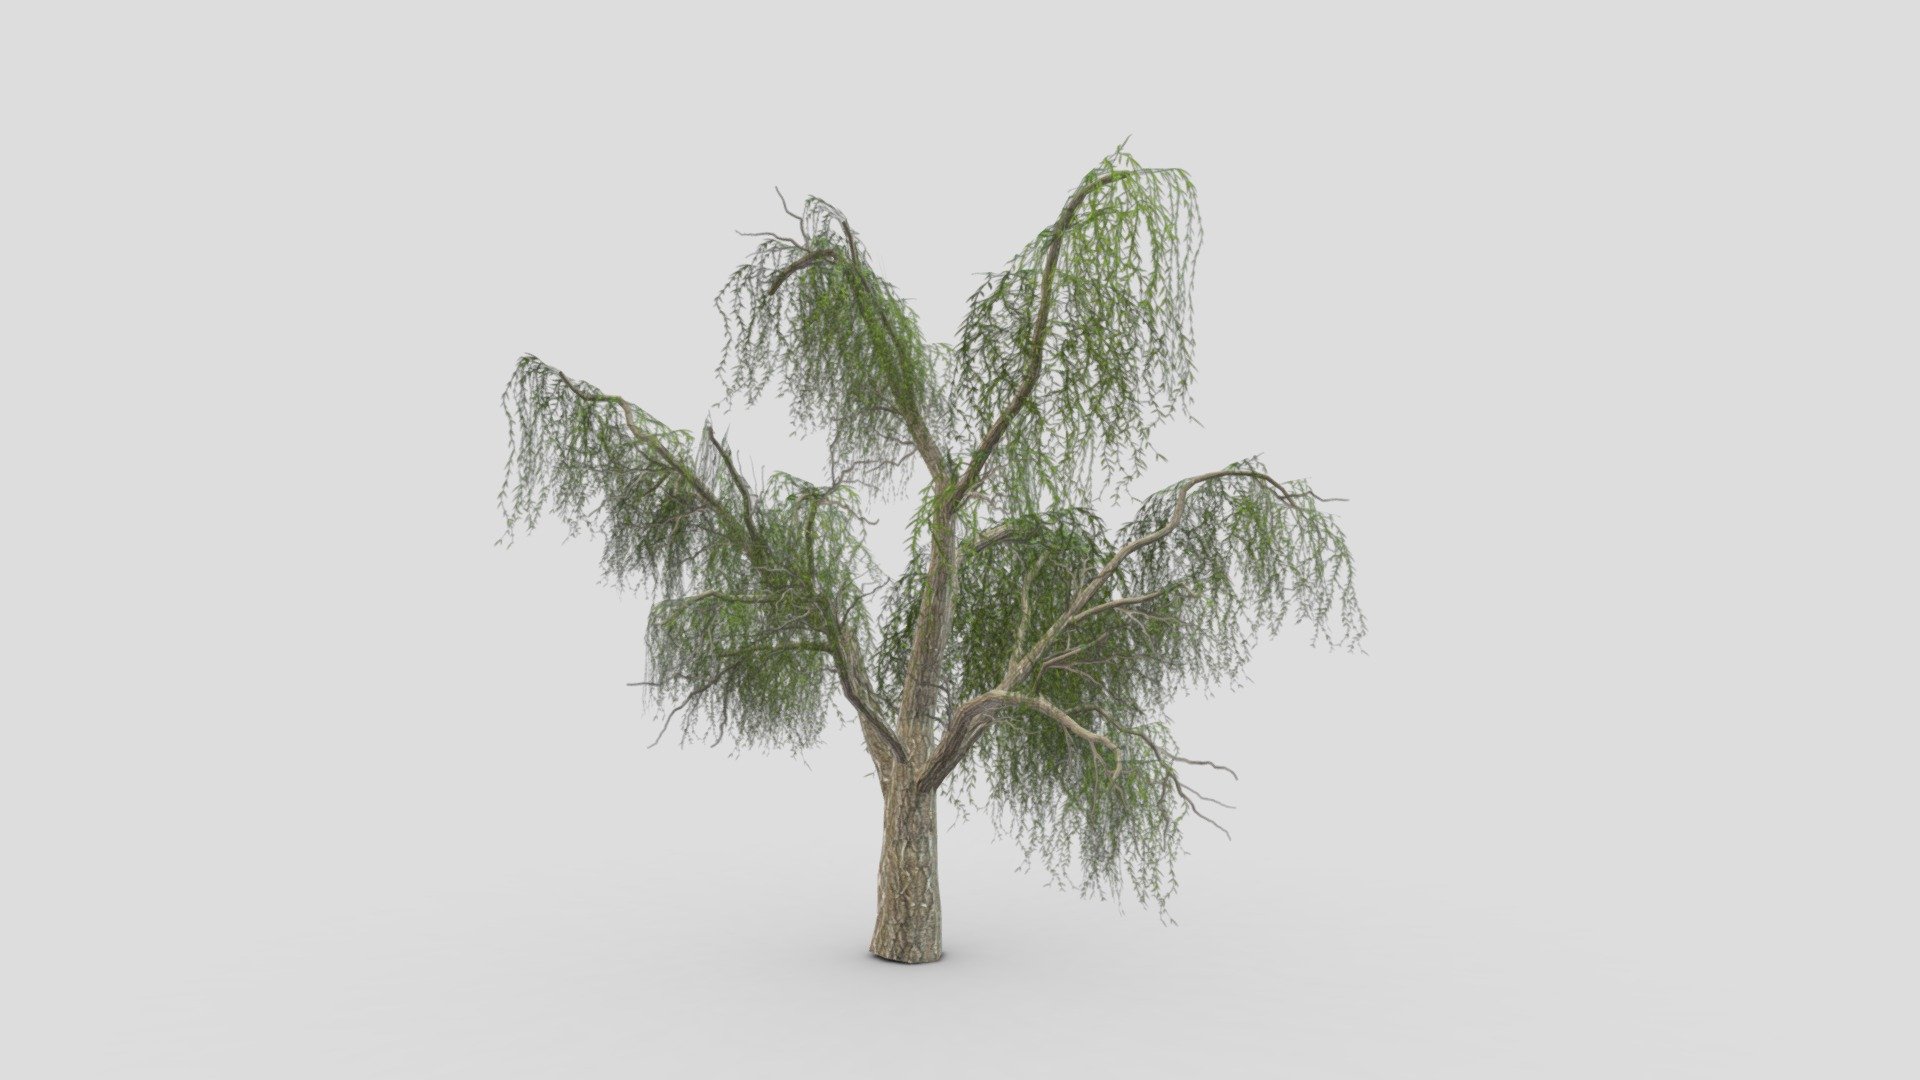 I try to provide low poly model of Weeping Willow tree to use for your game project. I hope this model will be useful for you 3d model